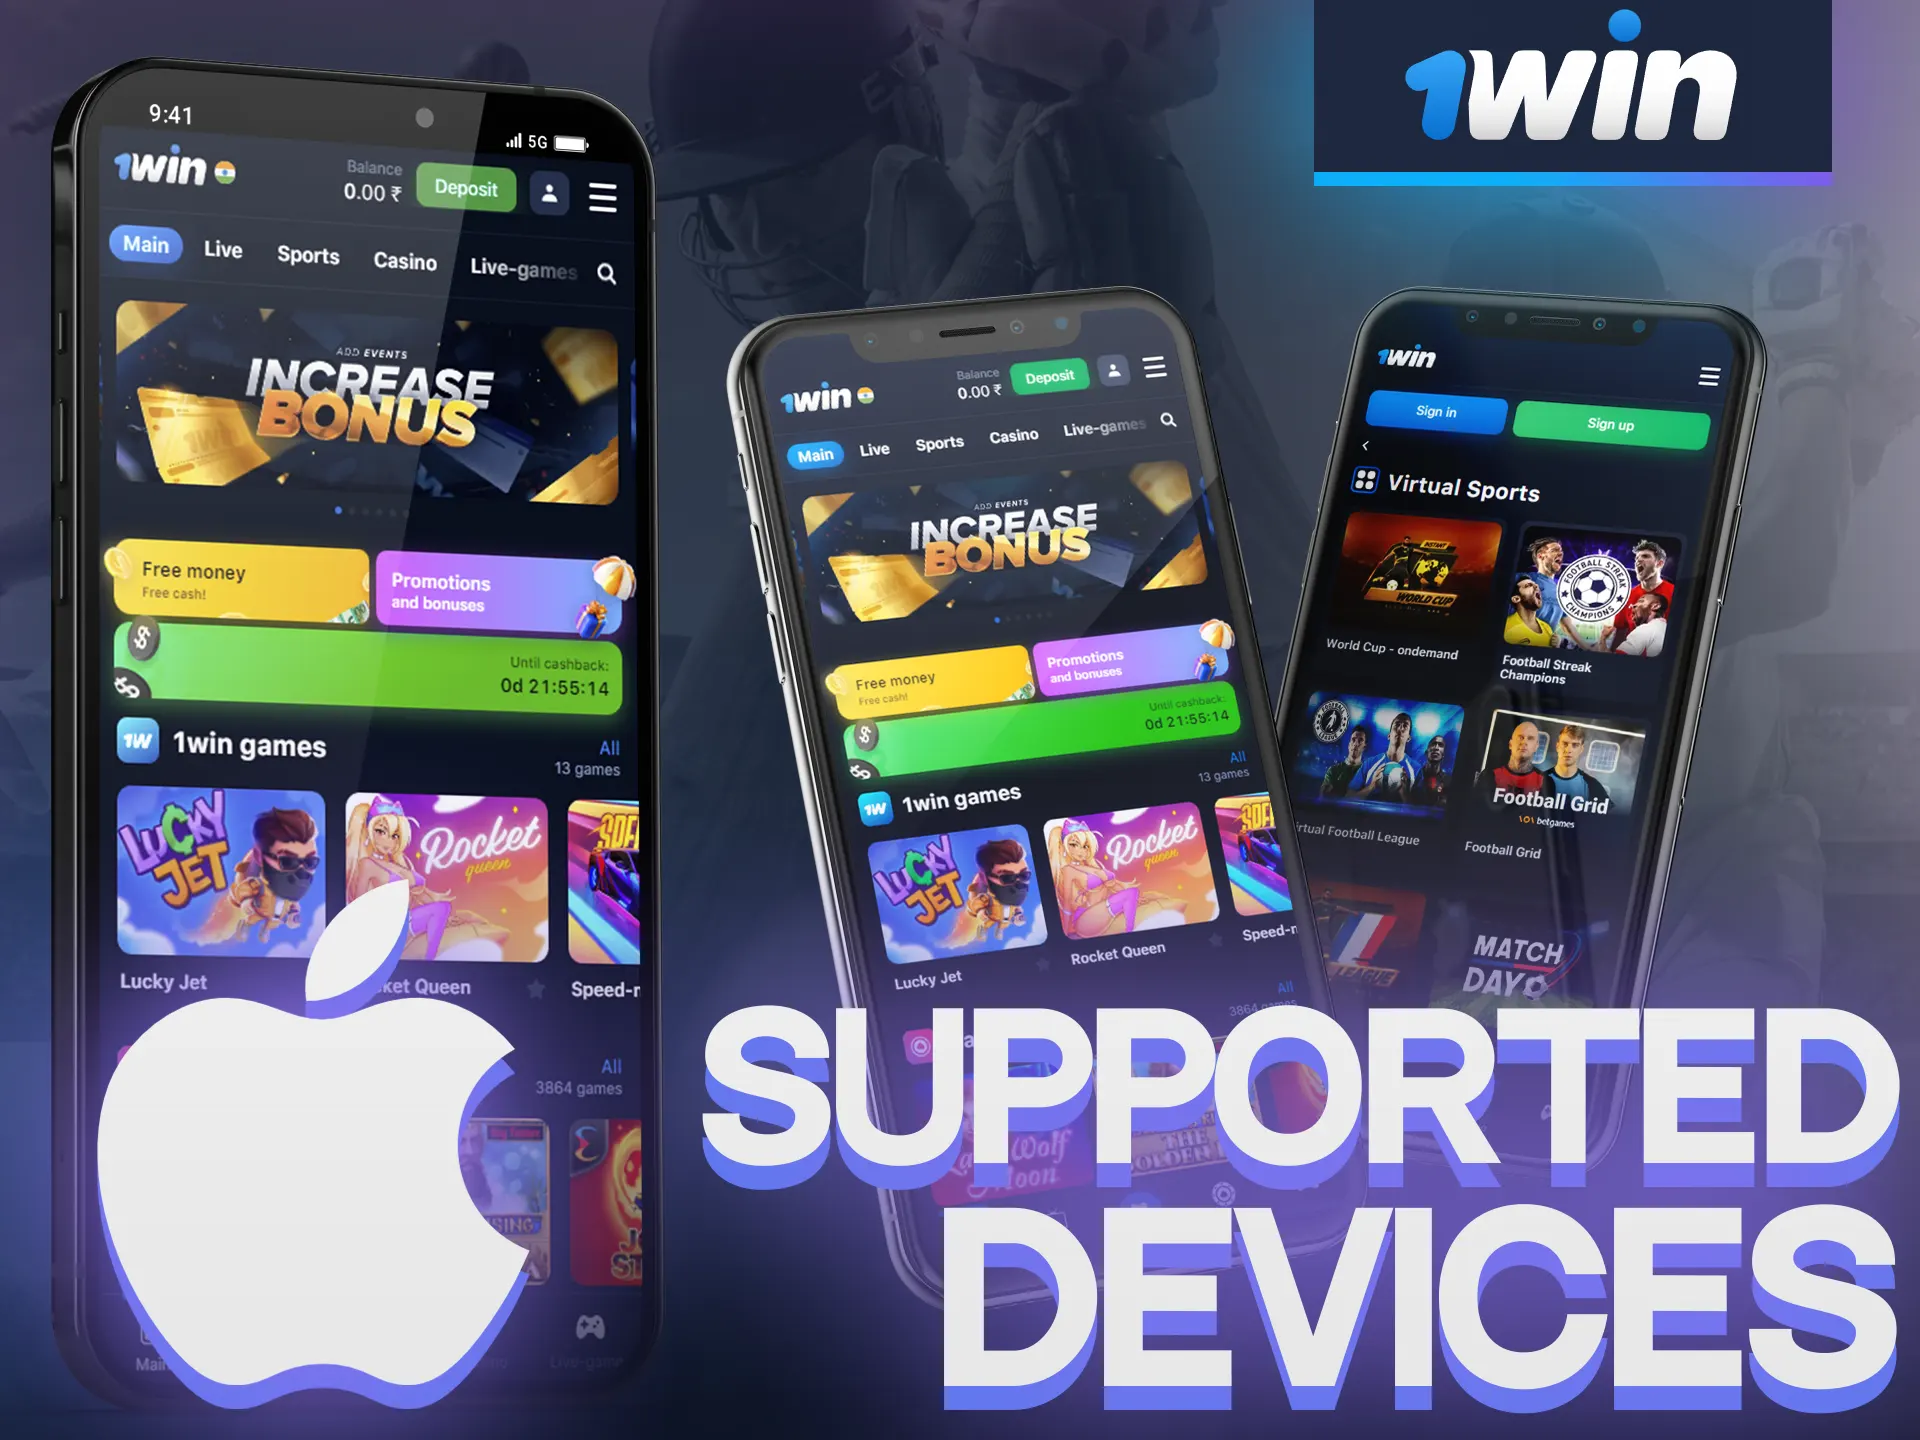 1Win app is supported on various iOS devices.